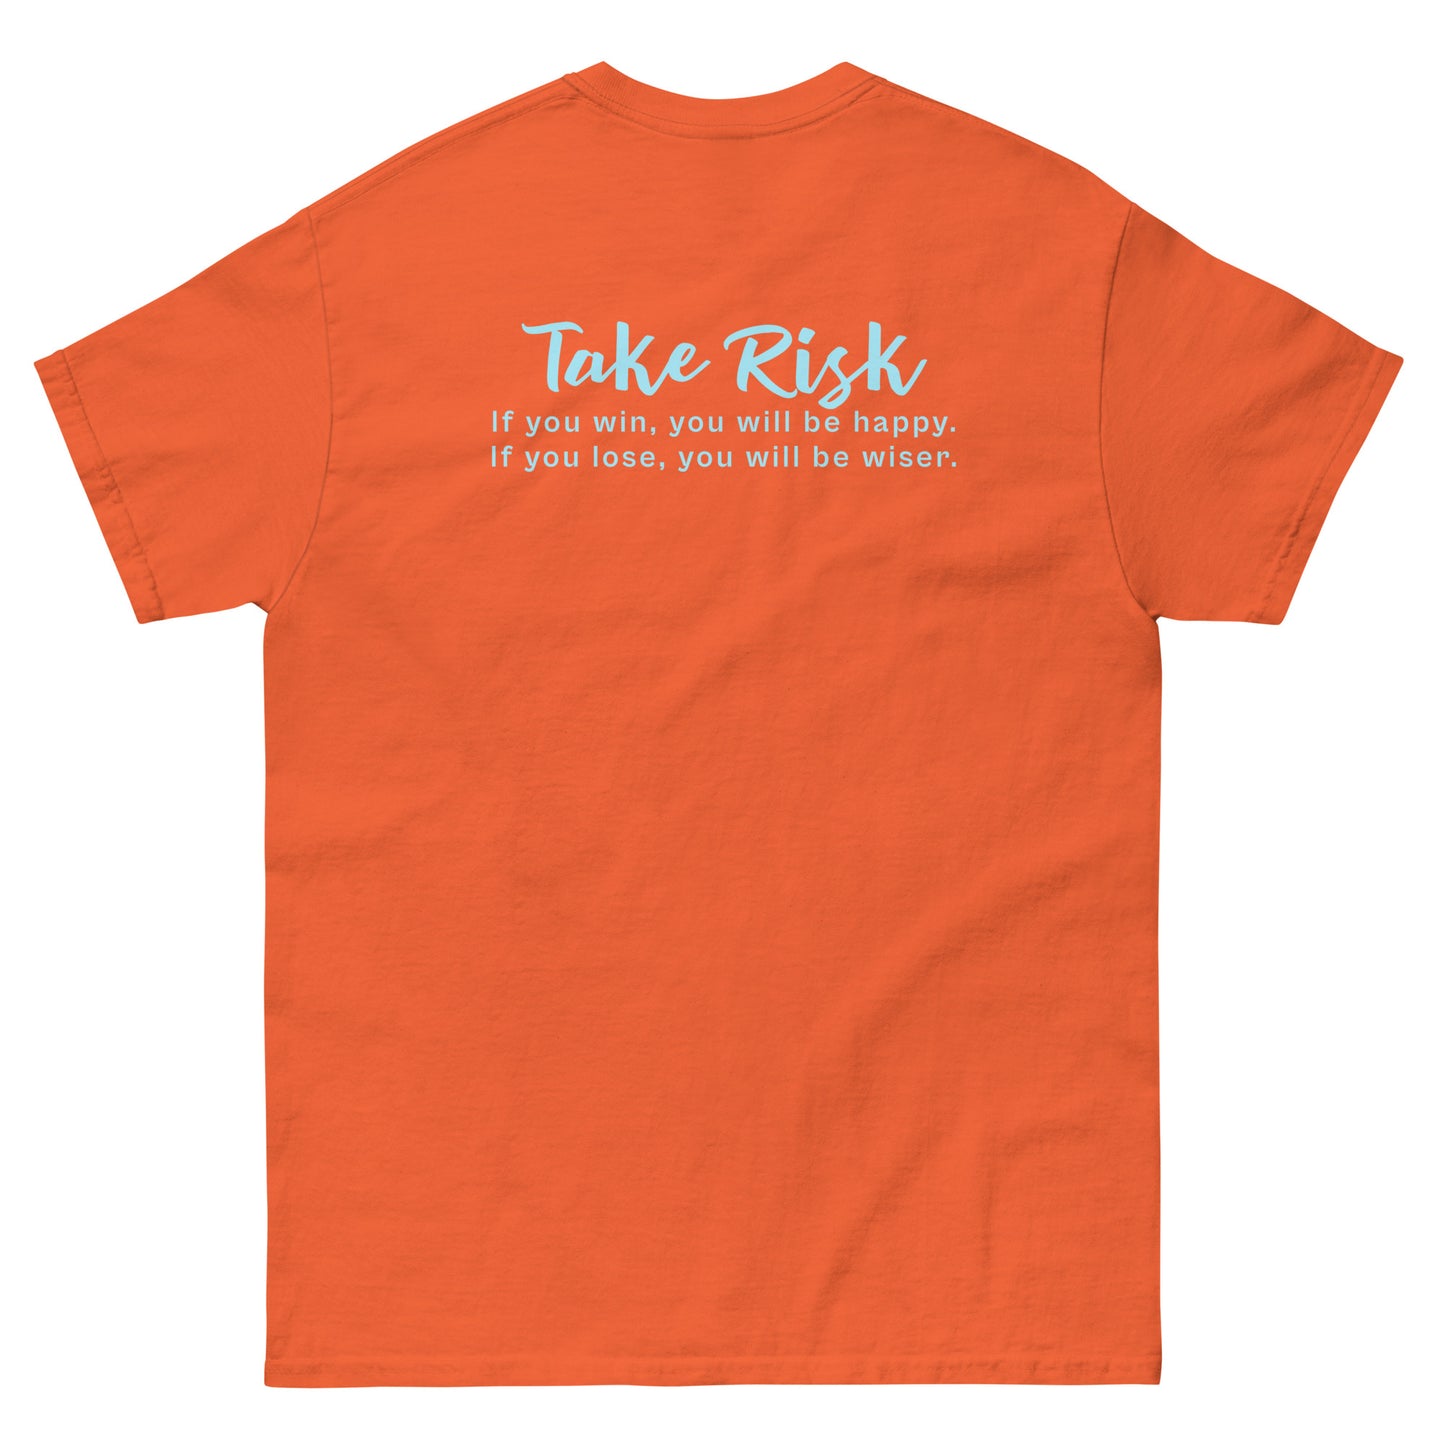 Orange High Quality Tee - Front Design with "Take Risk, if you win you will be happy, if you lose you will be wiser." print and an UFO print on left chest - Back Design with a Phrase "Take Risk, if you win you will be happy, if you lose you will be wiser." print